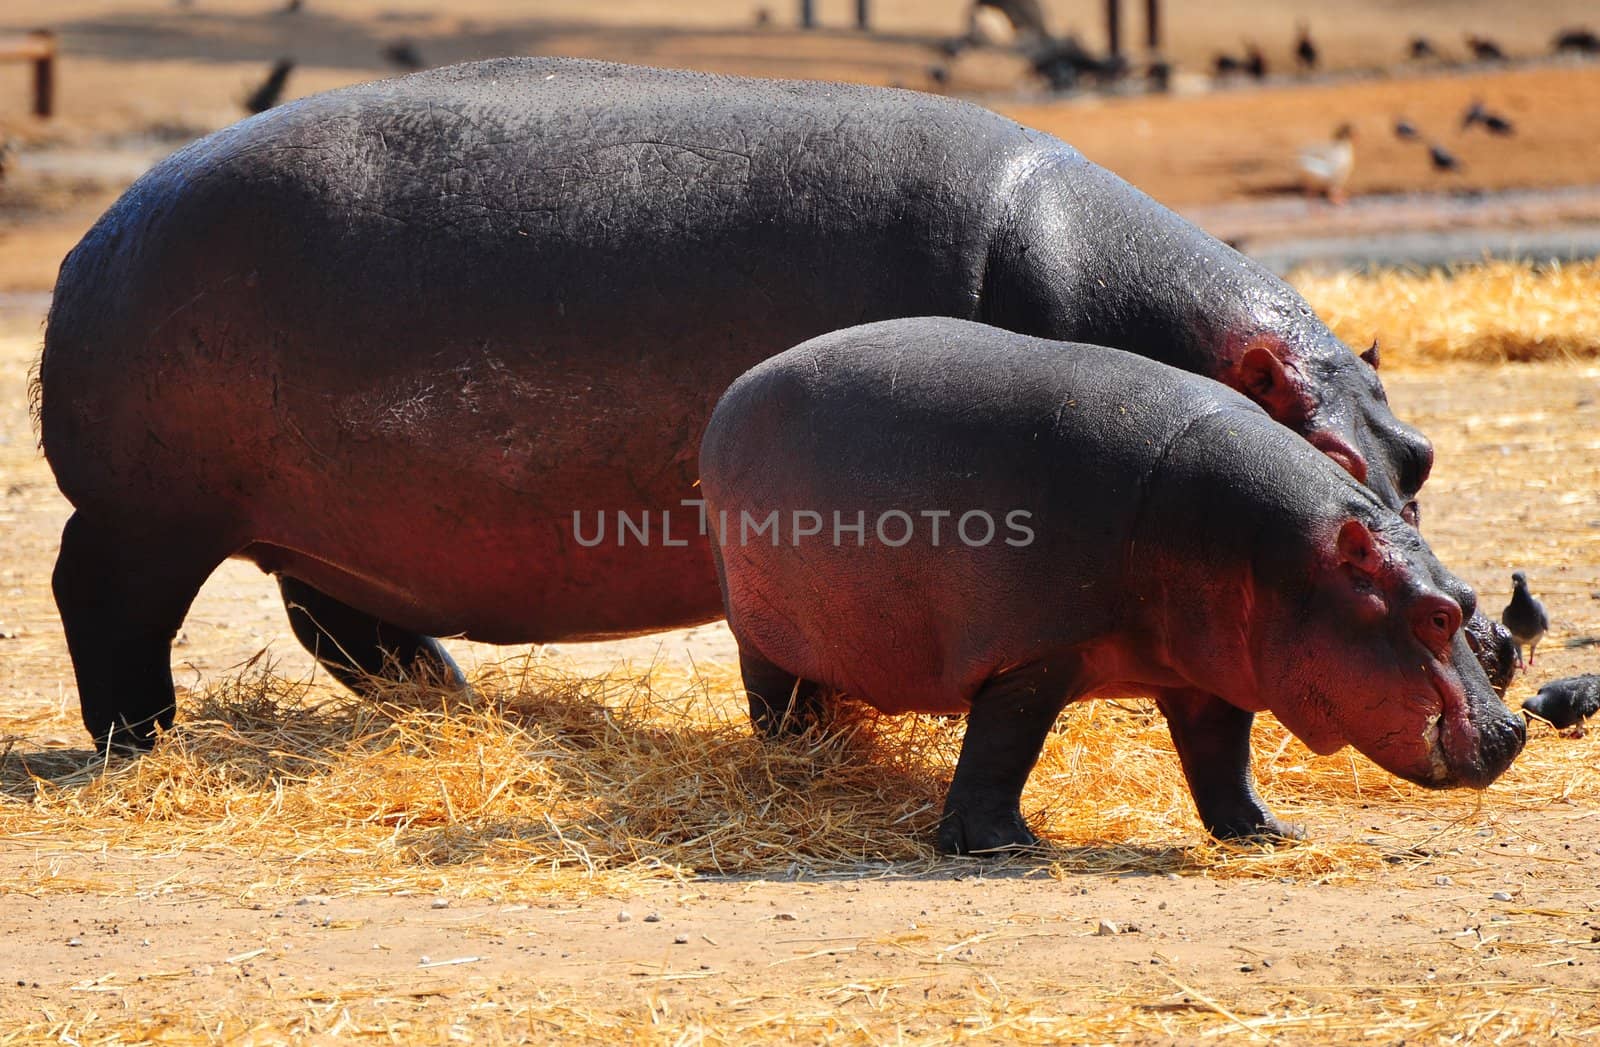 Hippopotamus, During The Evening They Go Out To Pasture